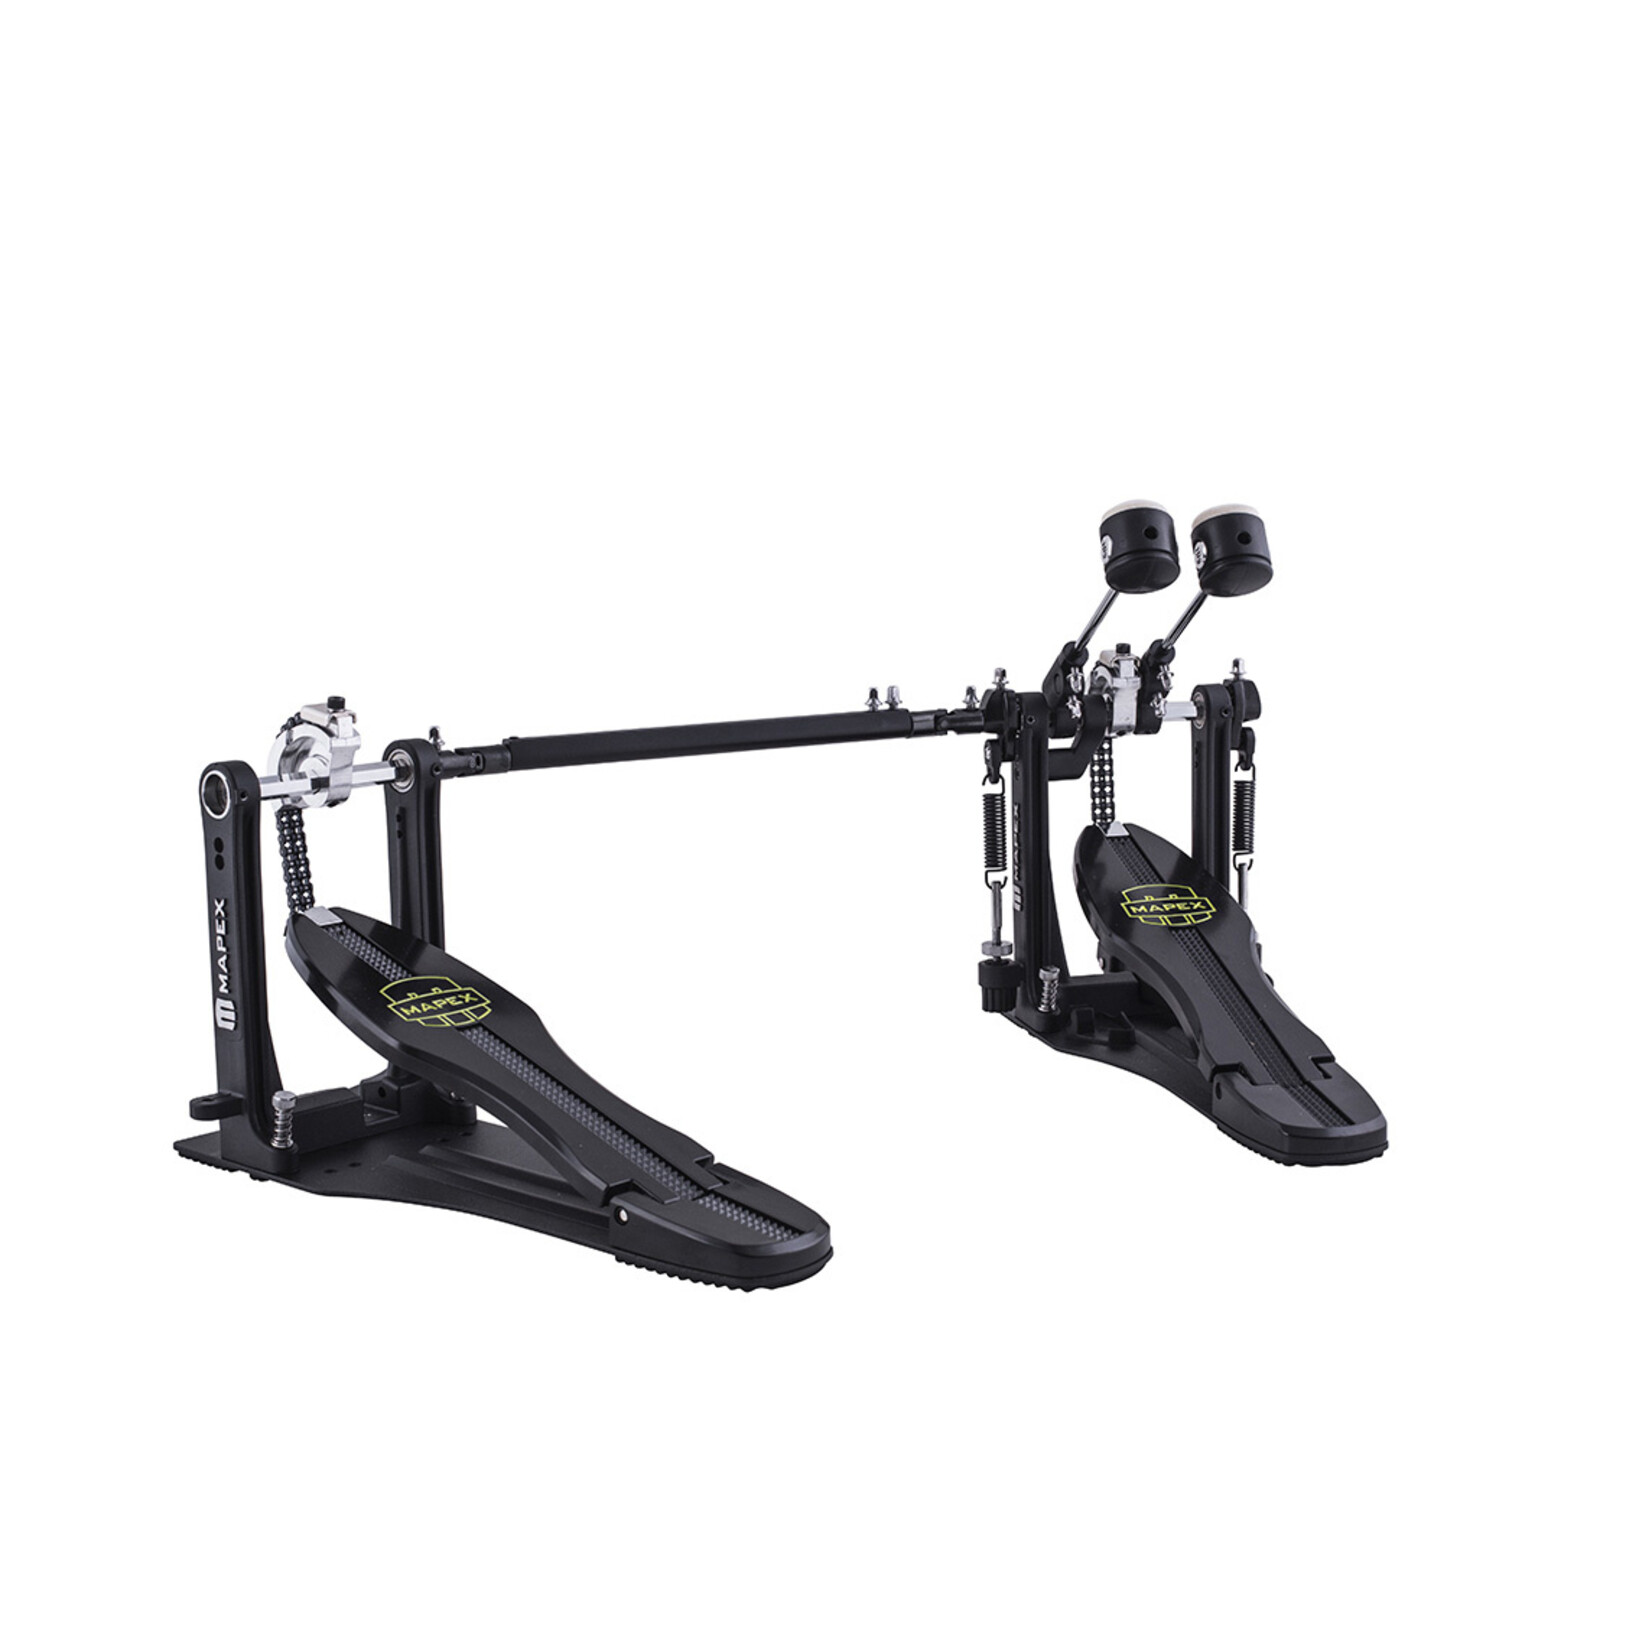 Mapex P810TW Armory Response Drive Double Pedal Double Chain w/ Falcon Beater Including Weights (Black)